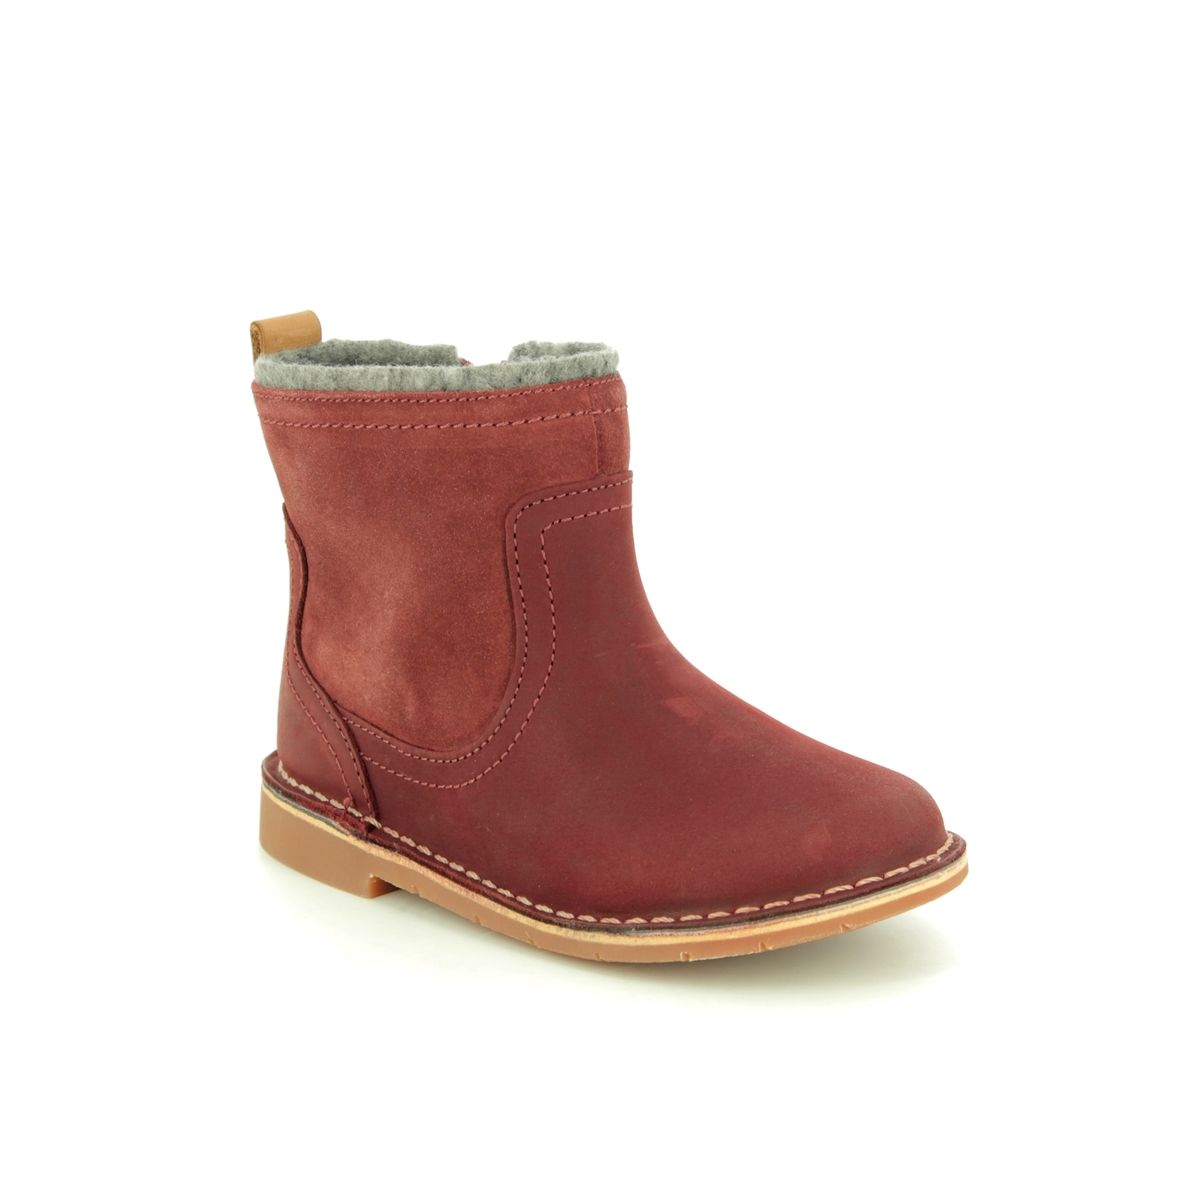 Clarks Comet Frost T Red leather Kids Toddler Girls Boots 4385-47G in a Plain Leather in Size 7.5